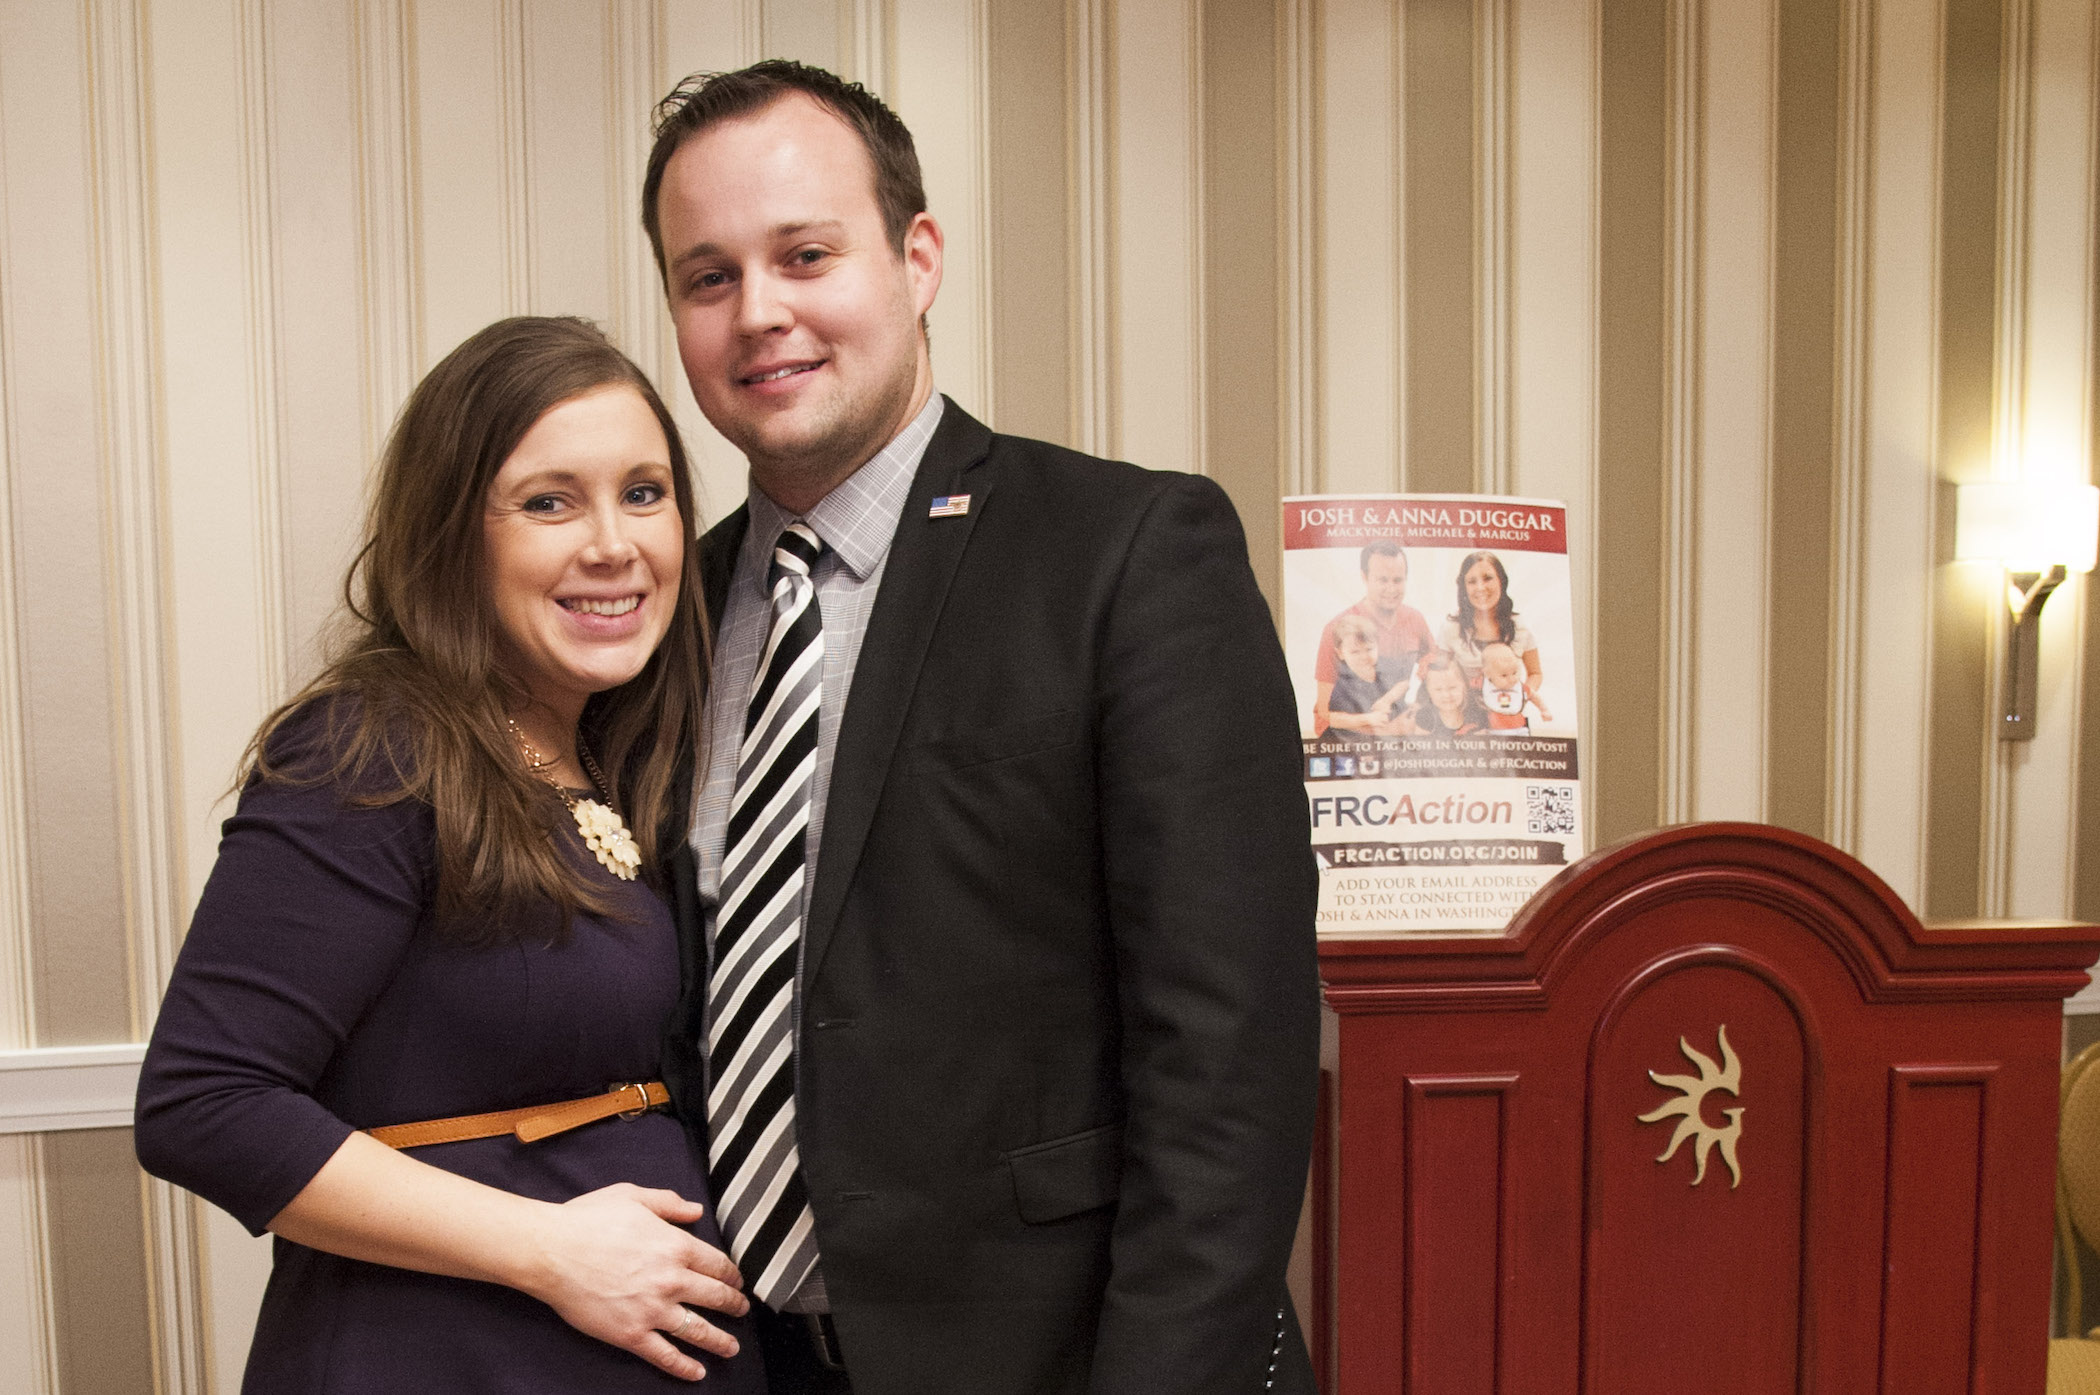 Anna Duggar and Josh Duggar smiling while at a conference. Anna is pregnant and holding her belly.